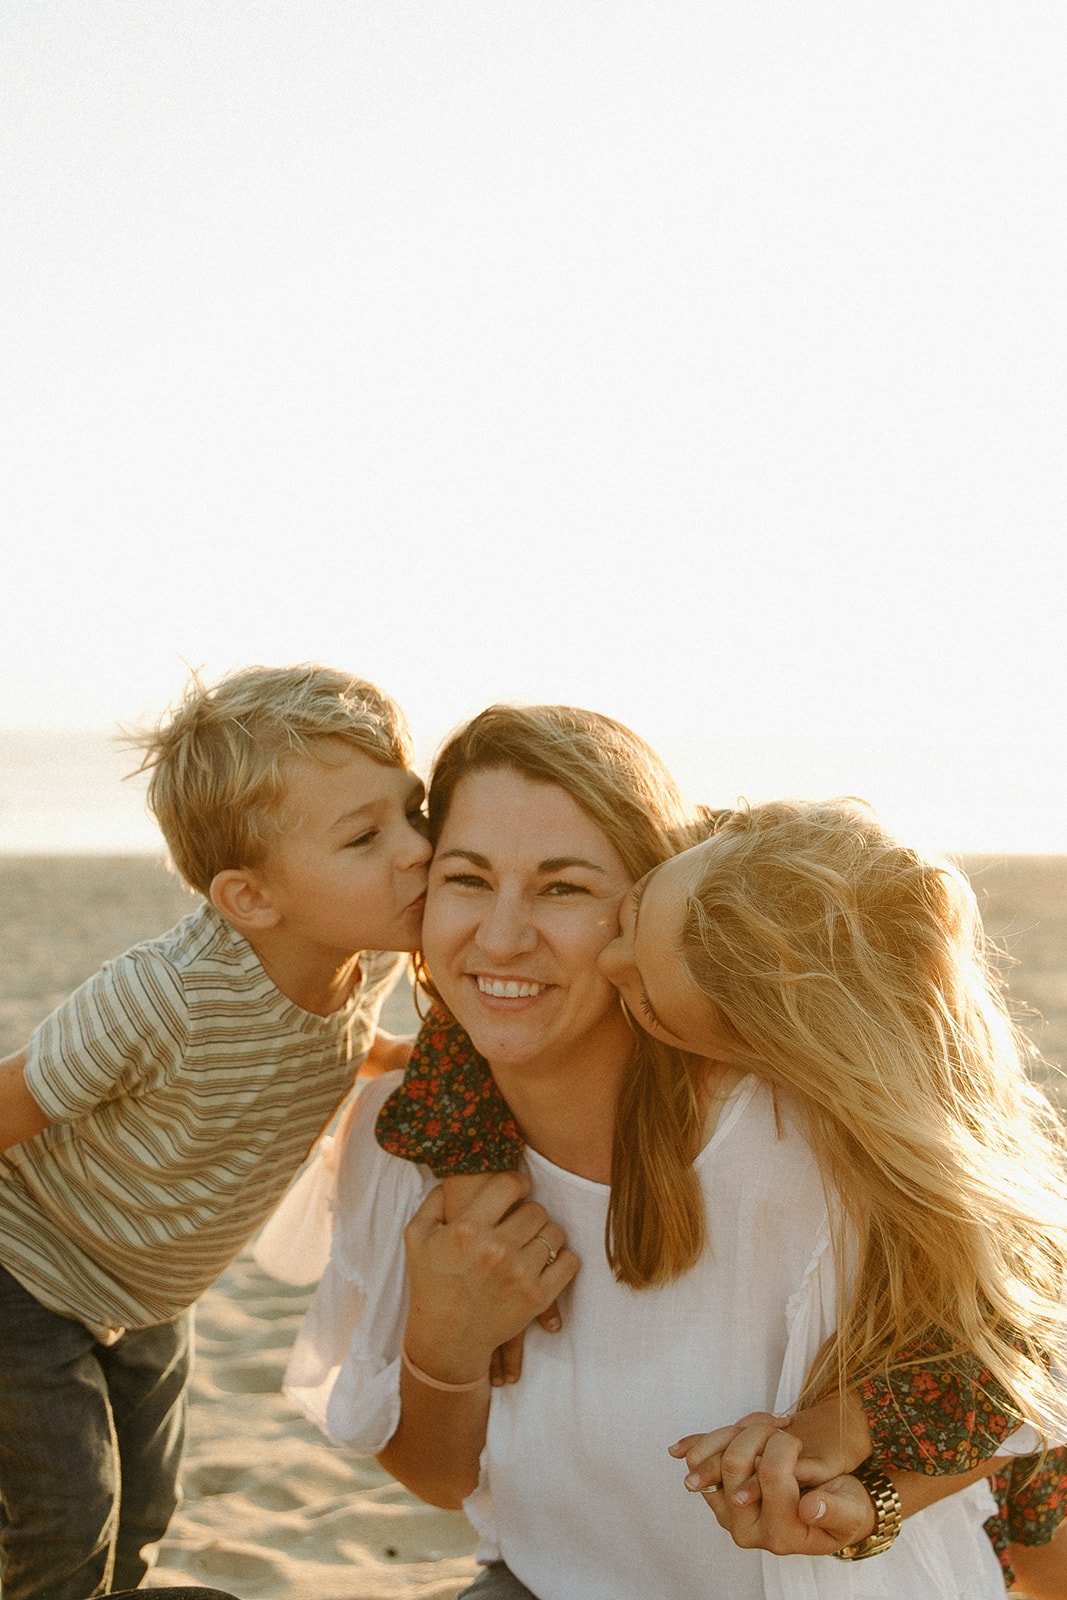 Kids kissing their mom on the cheek at the beach